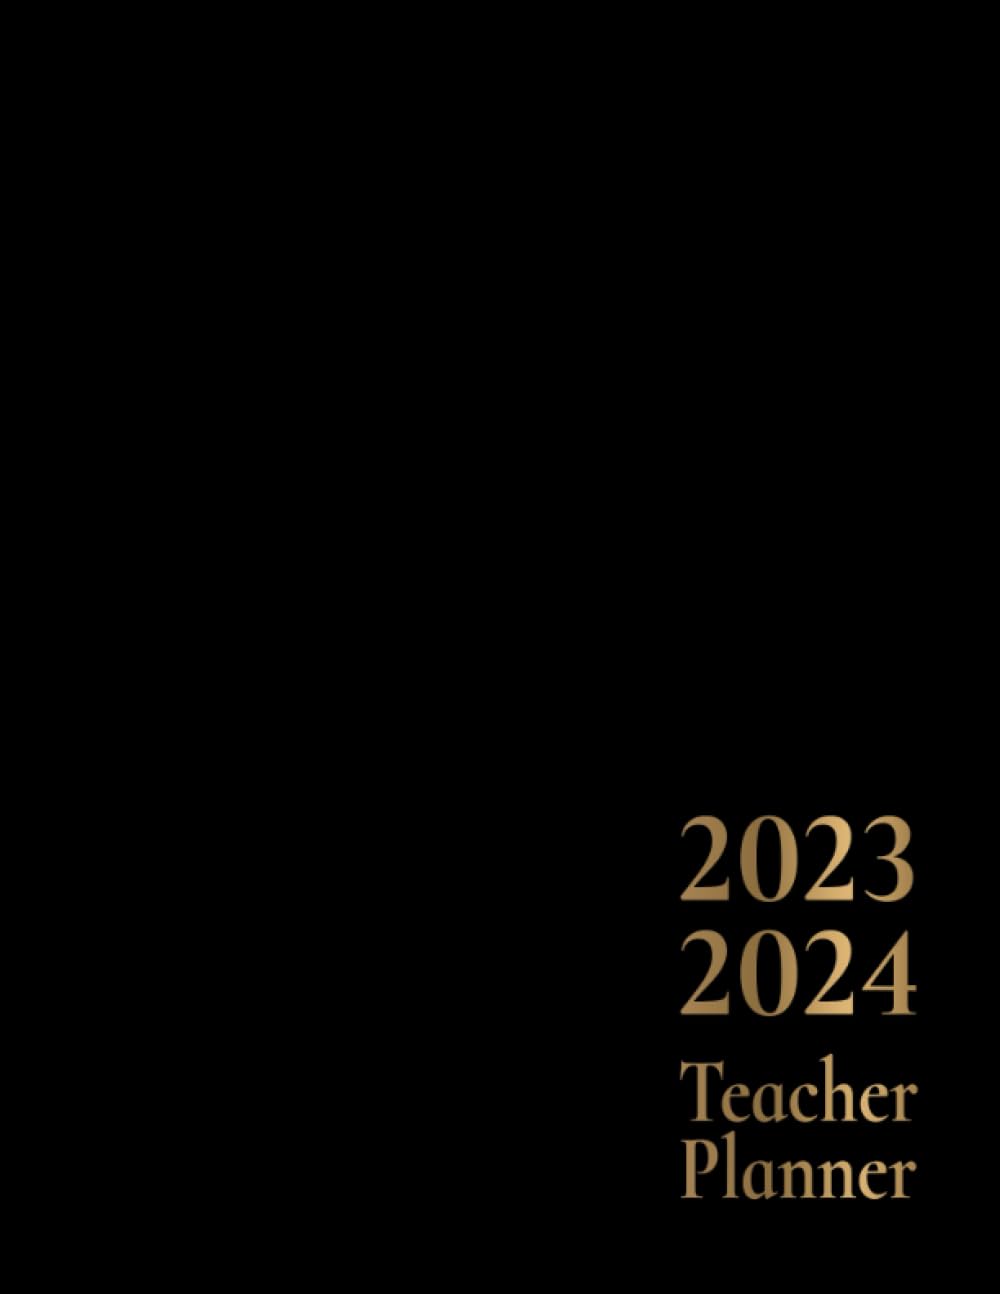 2023-2024 Teacher Planner: 2023-2024 Teacher timetable, Teacher Journal 2023-2024 From Aug 2023 - July 2024 With Quotes Inside, Deluxe Cover design and Black Color